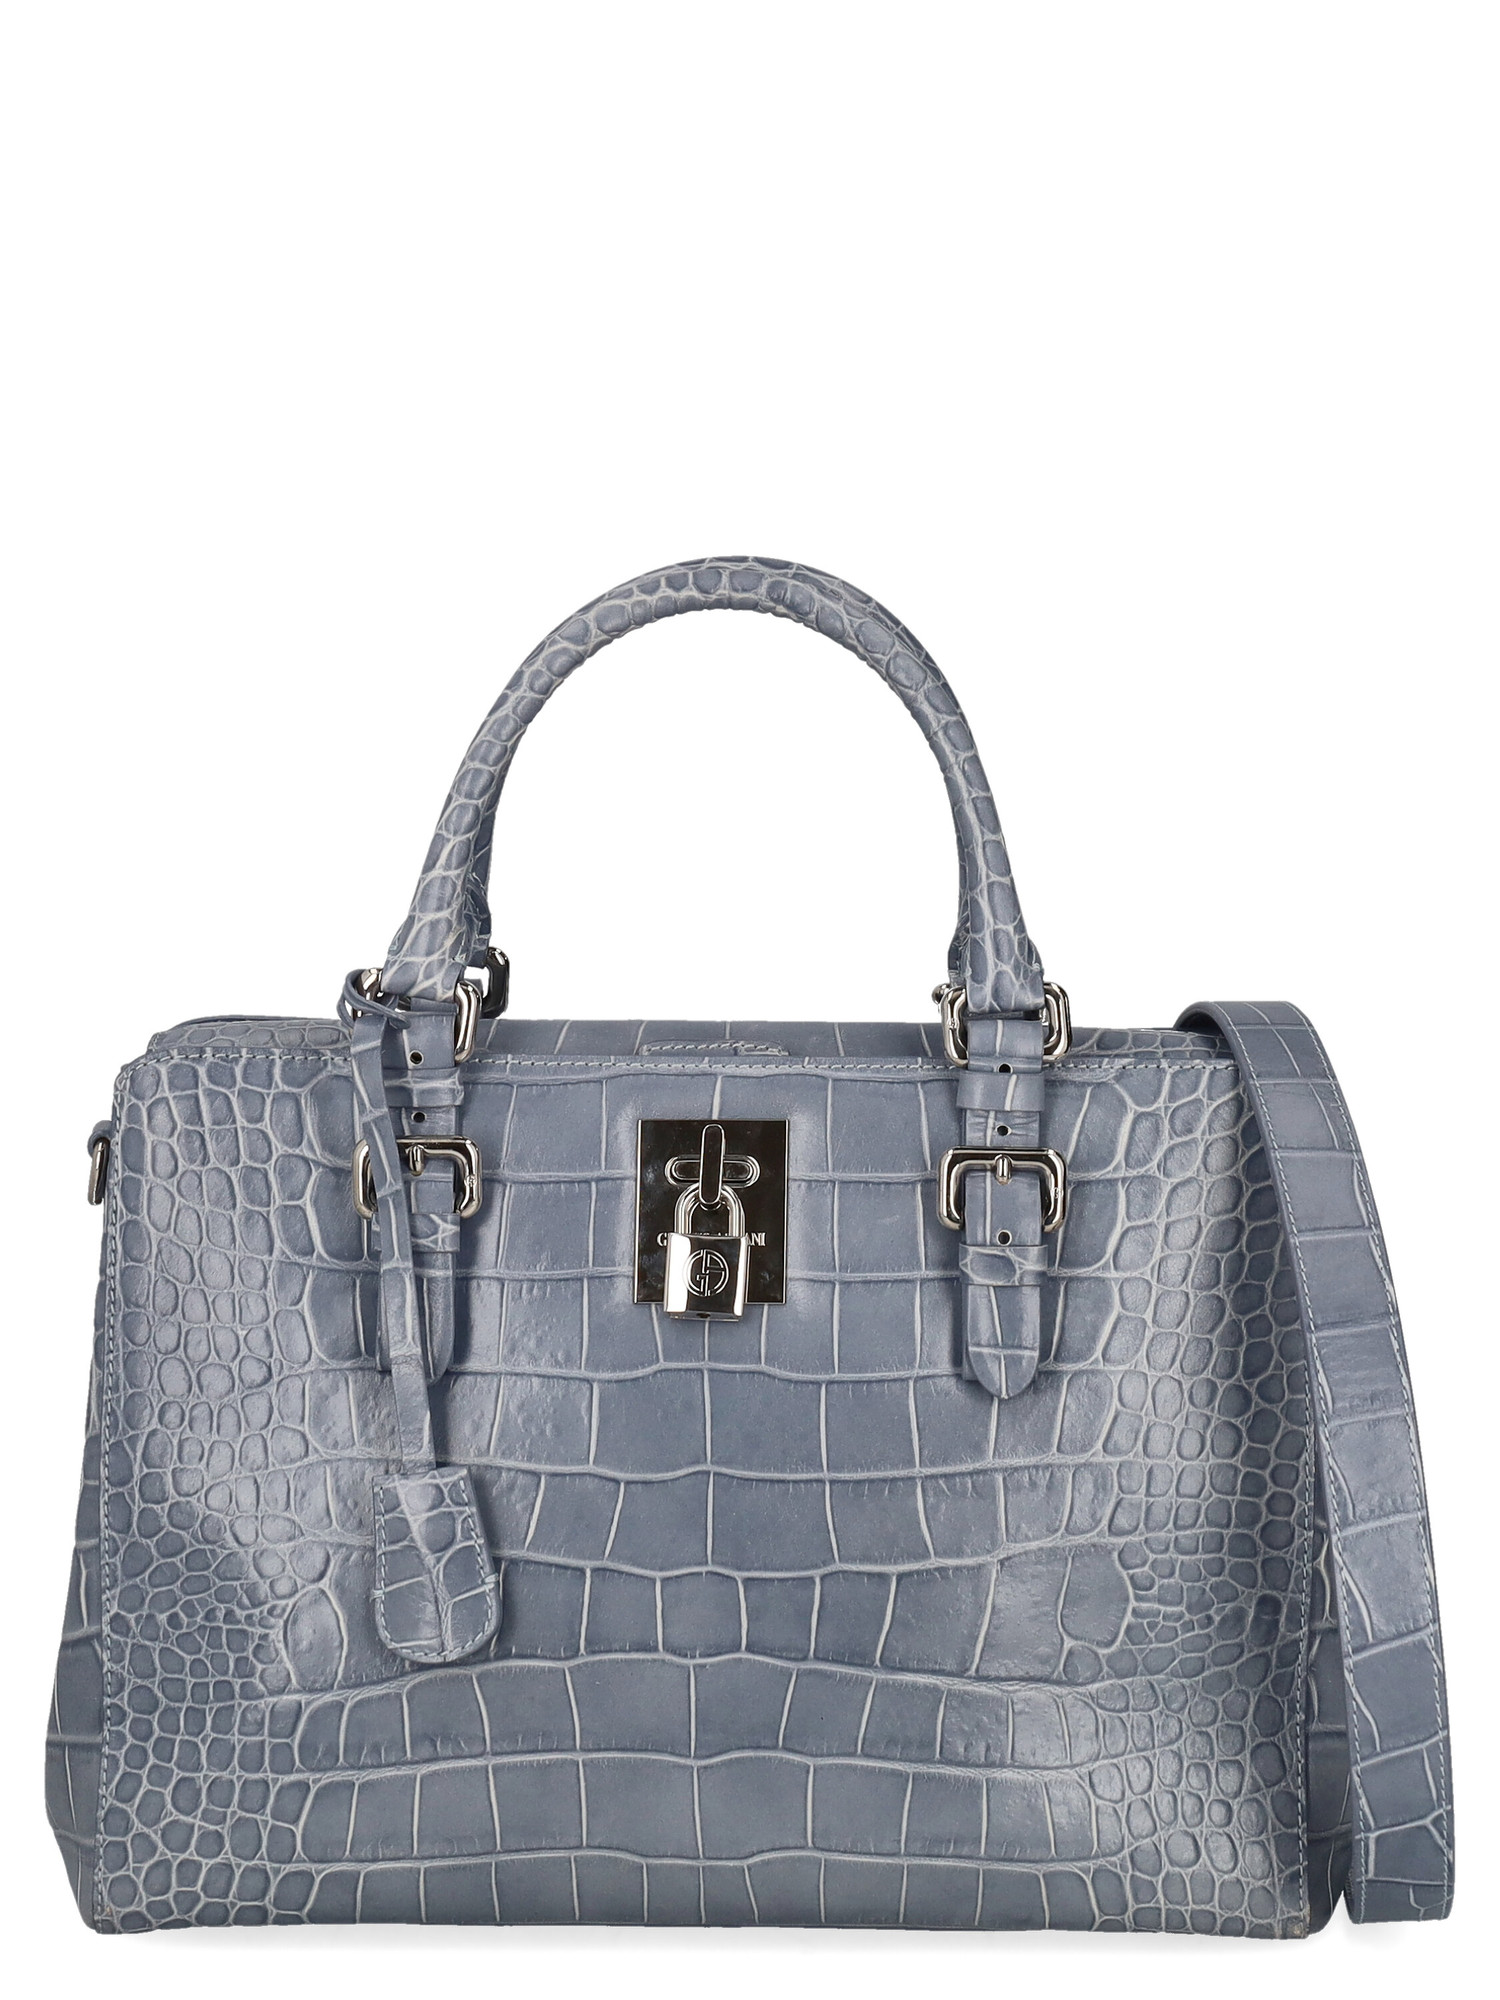 Condition: Very Good, Crocodile Print Leather, Color: Blue -  -  -